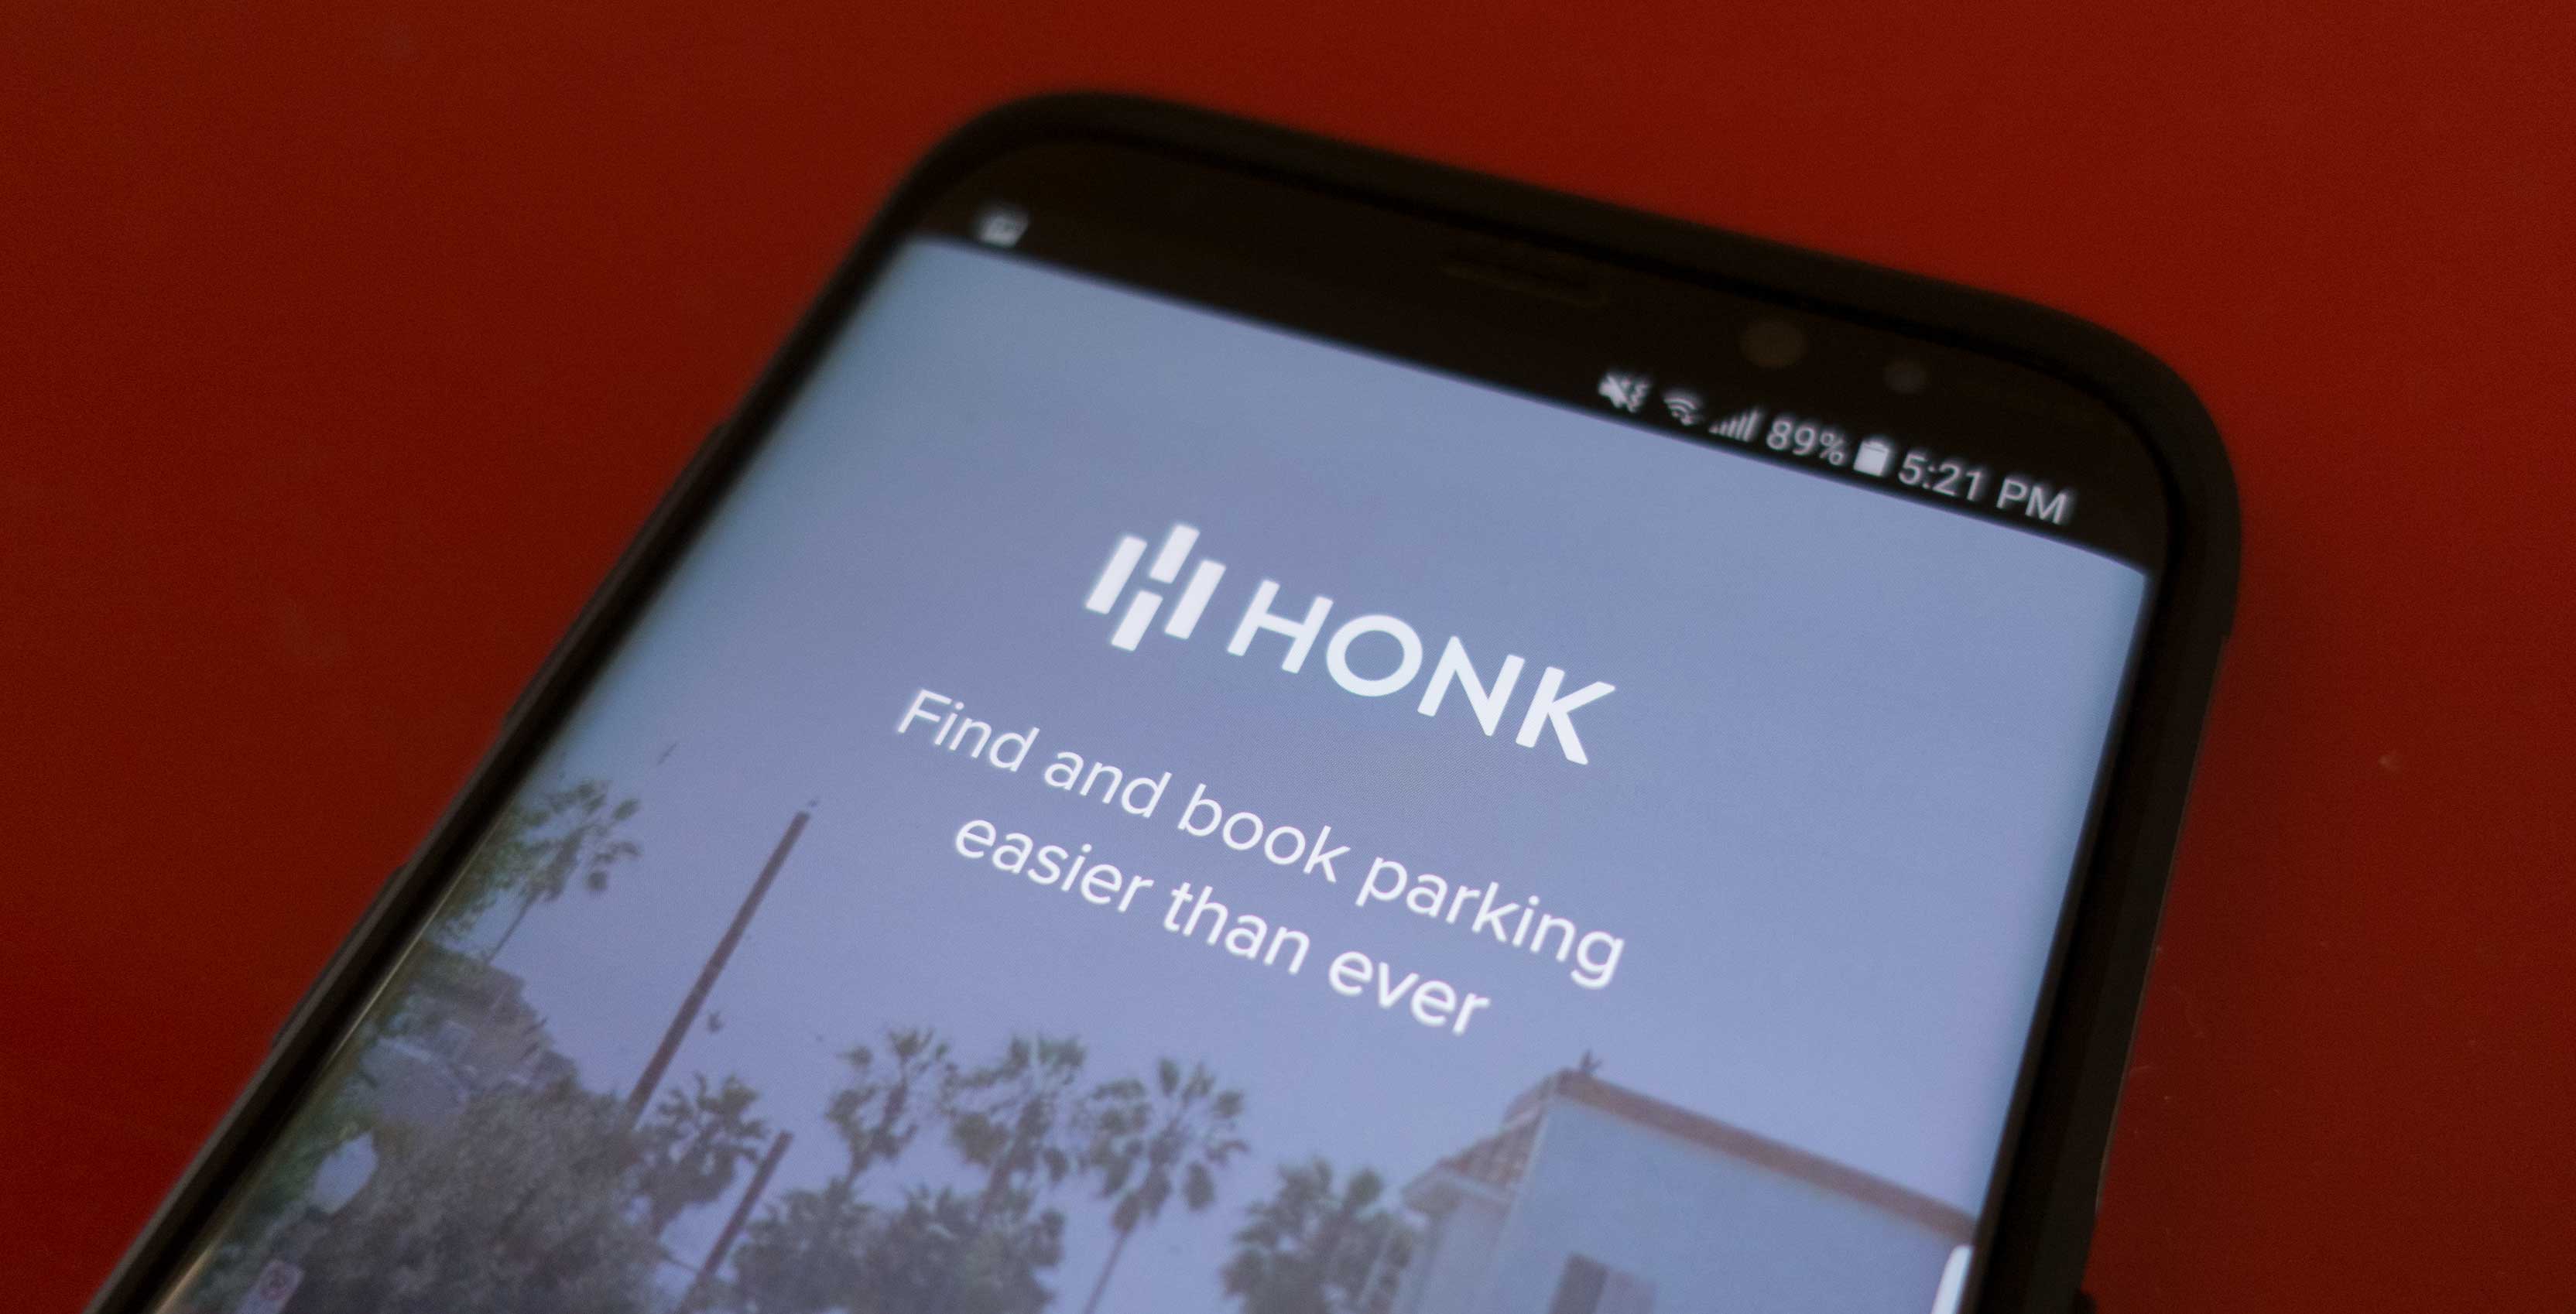 An image showing the HonkMobile main page